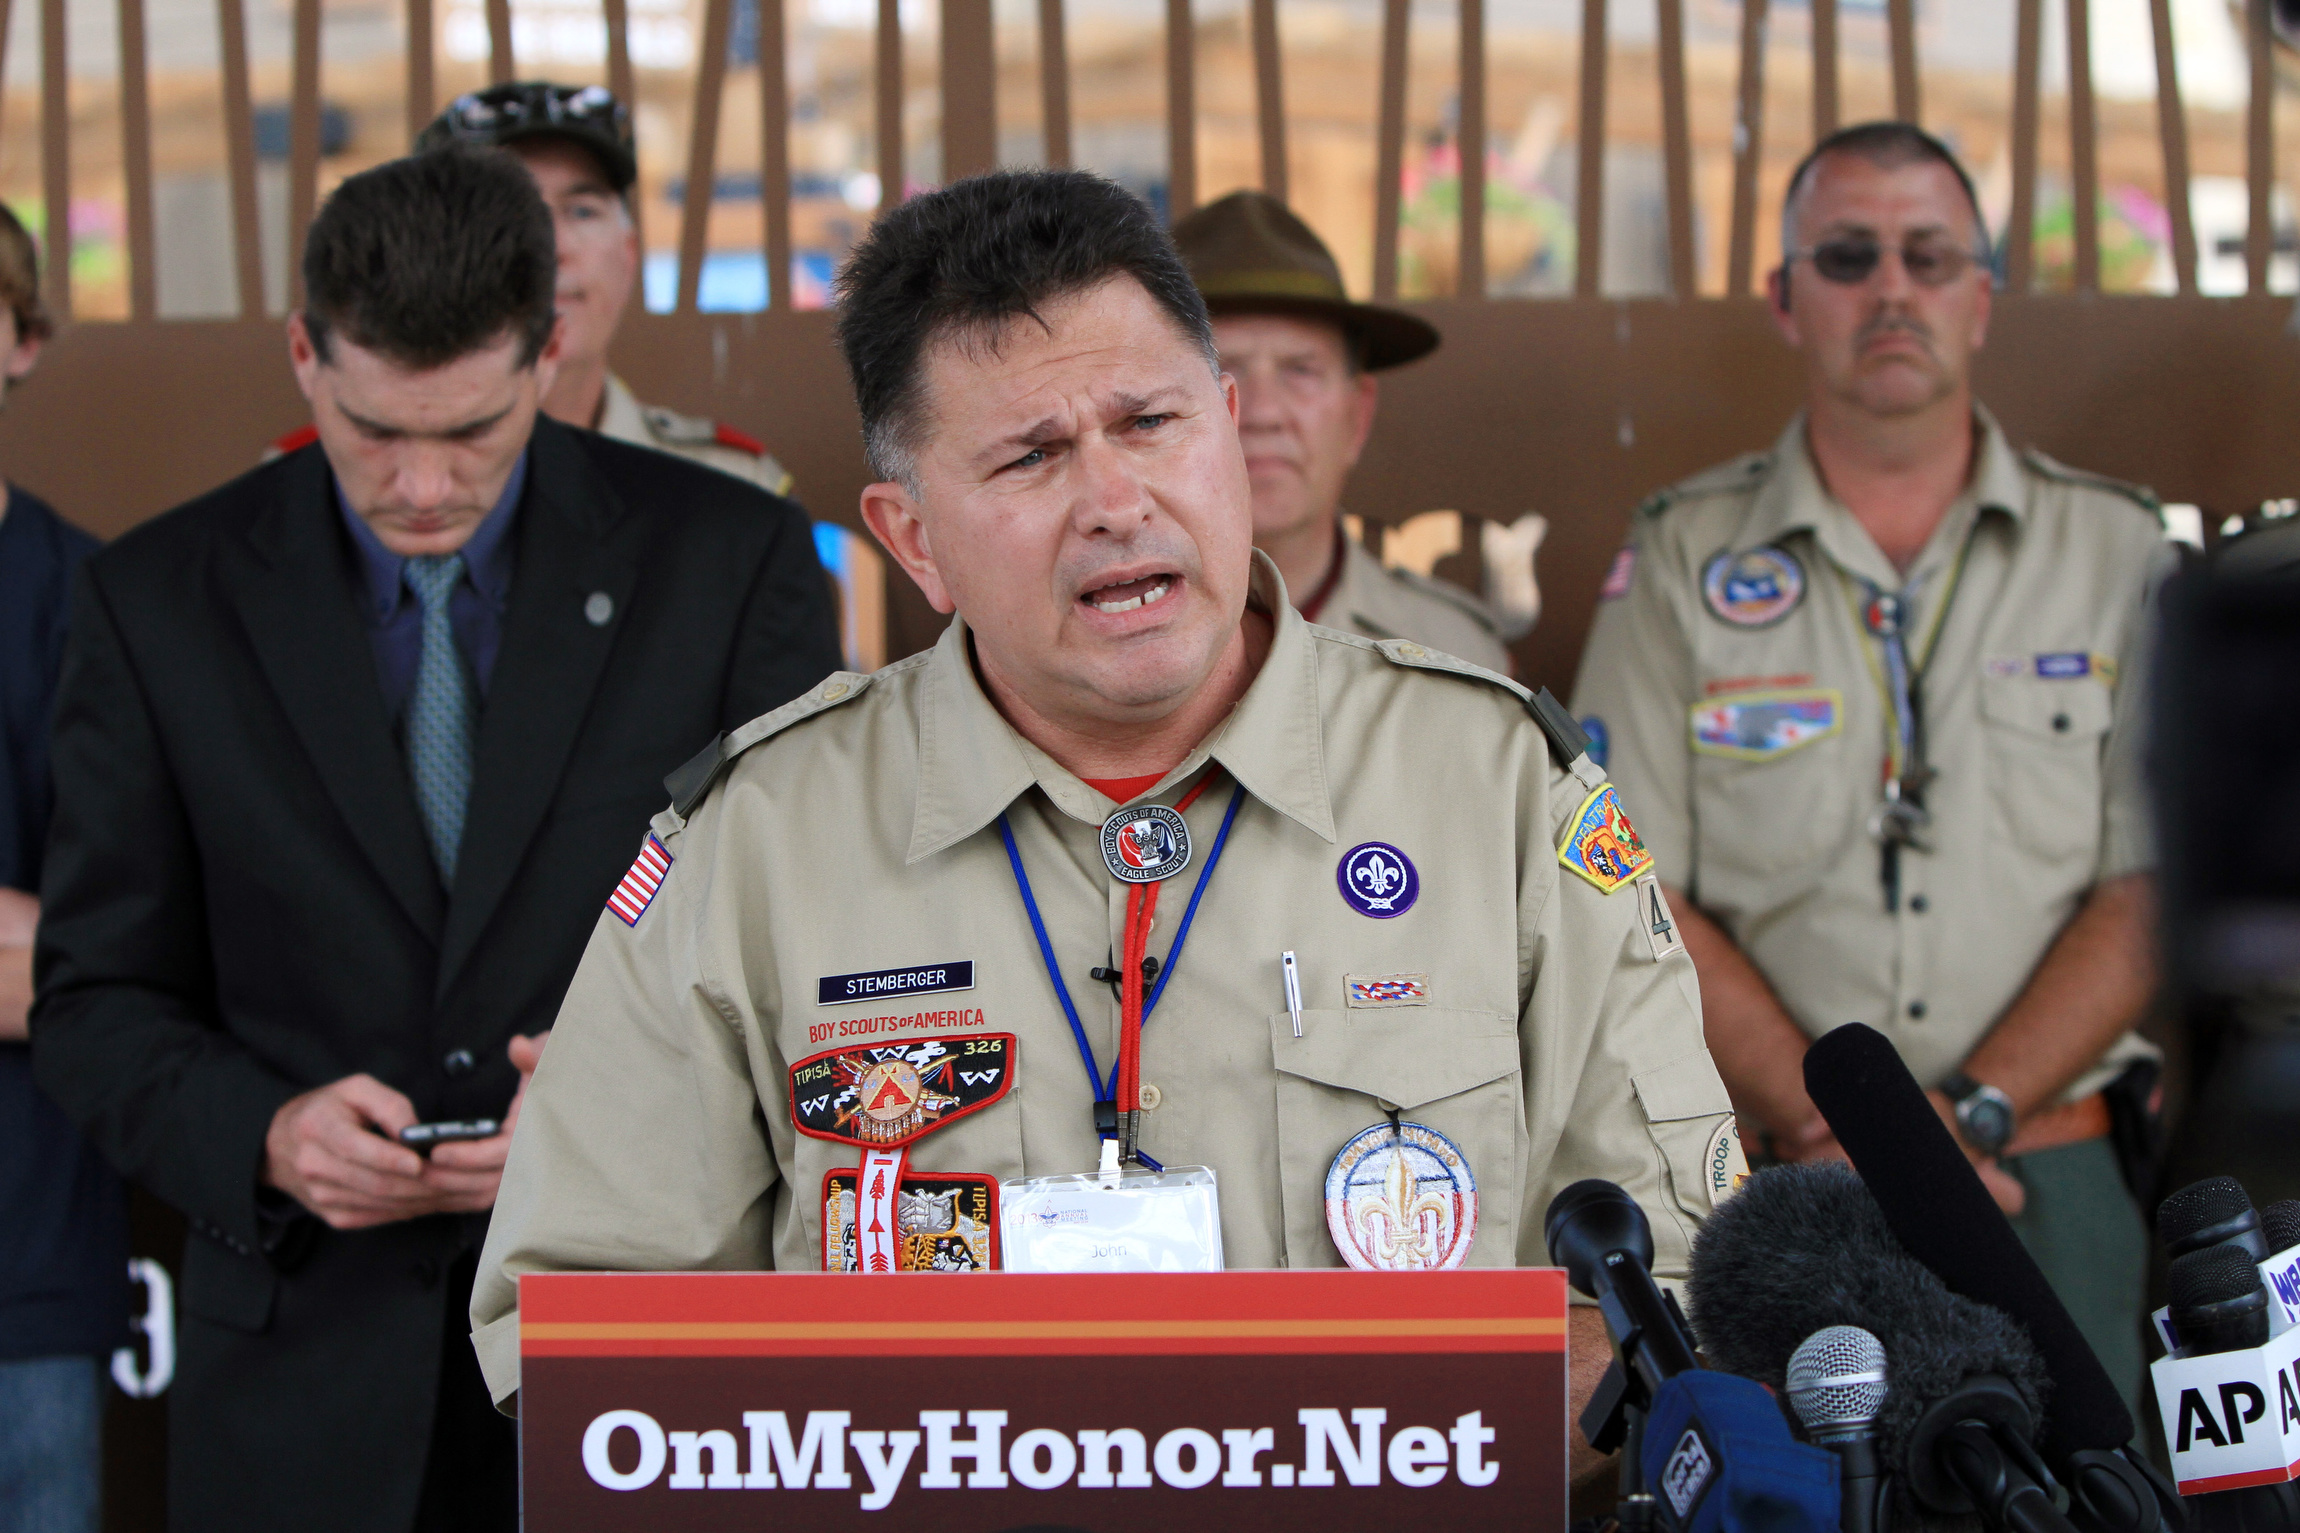 John Stemberger, an Eagle Scout and founder of OnMyHonor.Net, a coalition opposed to allowing open homosexuality in the Boy Scouts of America, addresses the media May 23 in Grapevine, Texas, after the Scouts voted on allowing openly gay members to join the Boy Scouts of America May 23. (CNS photo/Ben Torres)